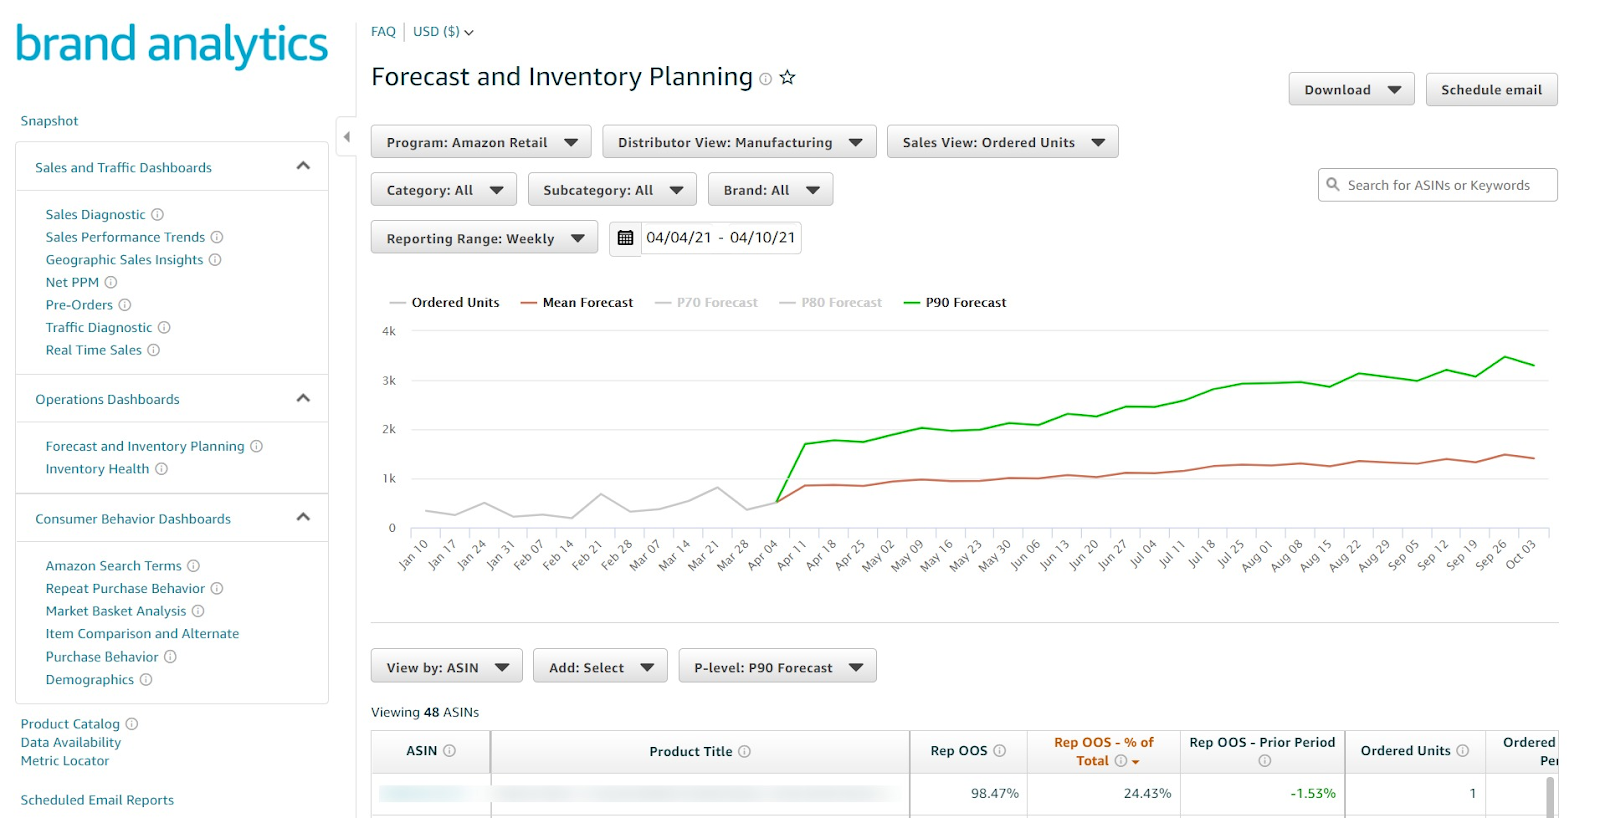 Forecast and Inventory Planning - P90 Forecast Dashboard